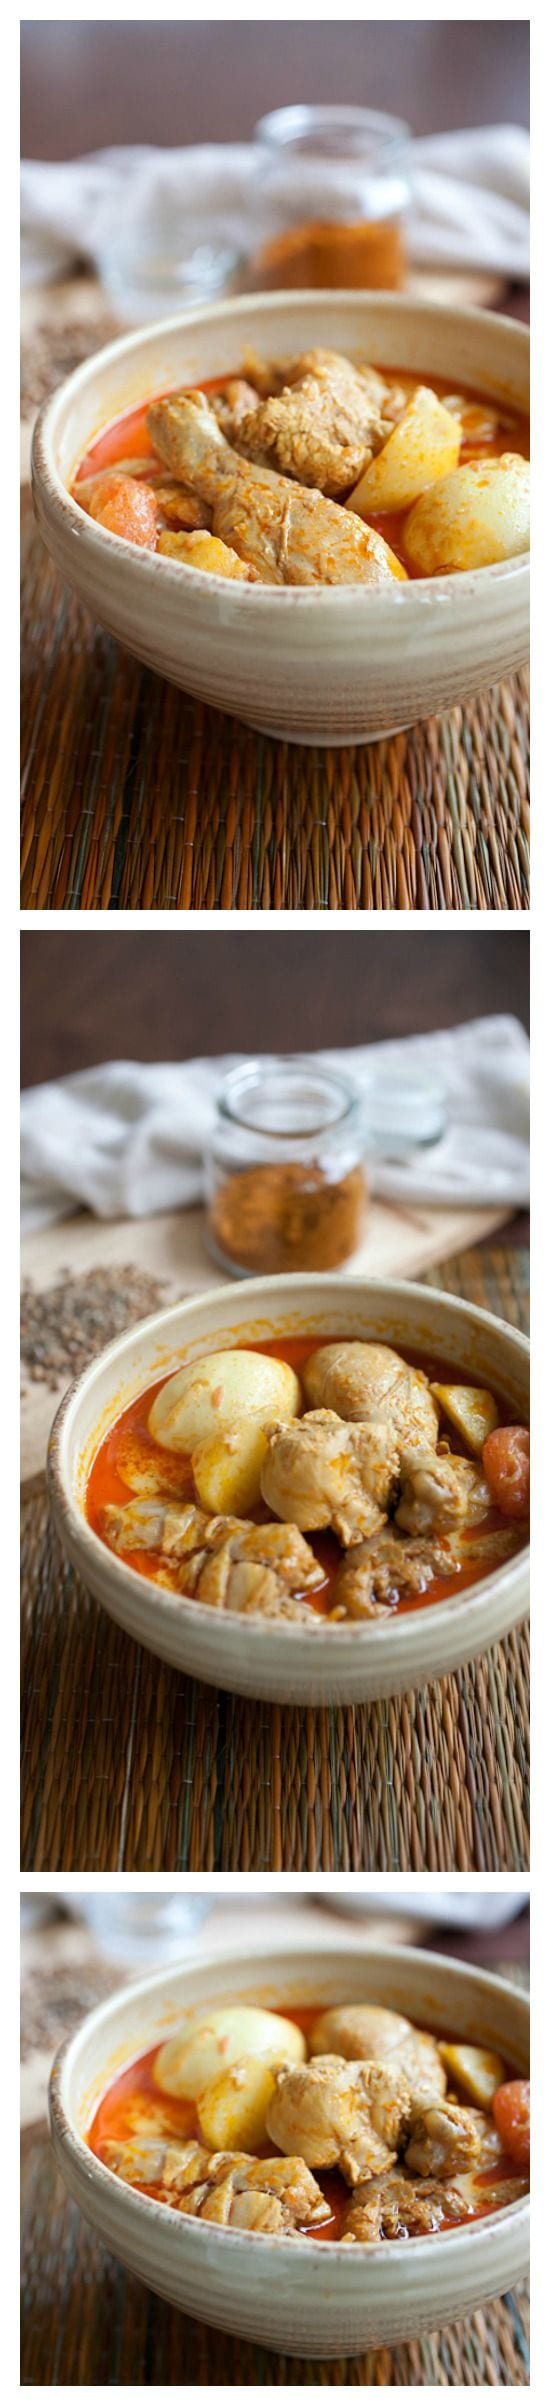 Easy Chicken Curry Recipe. DELICIOUS and can be made with easy-to-get ingredients at regular stores. Once you try this curry, you will want more | rasamalaysia.com